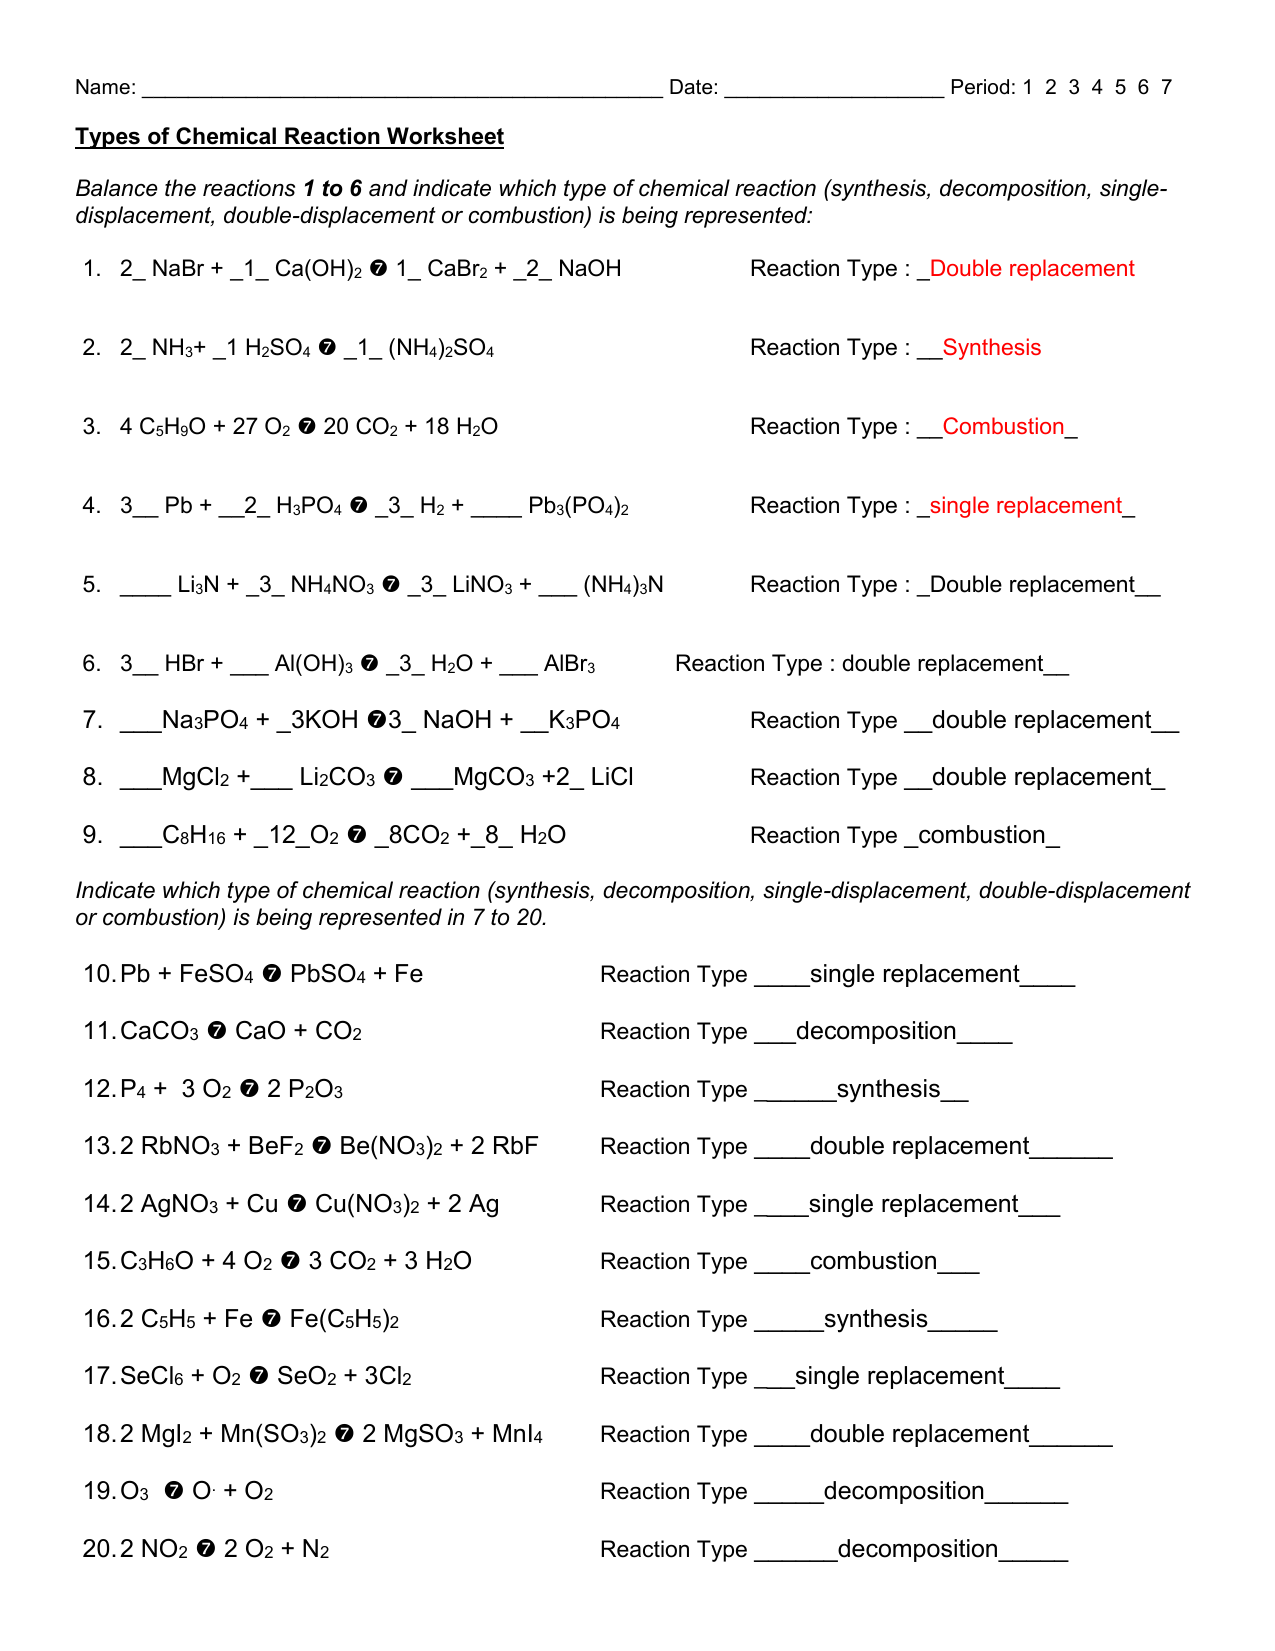 Types of Chemical Reaction Worksheetanswers Intended For Types Of Reactions Worksheet Answers